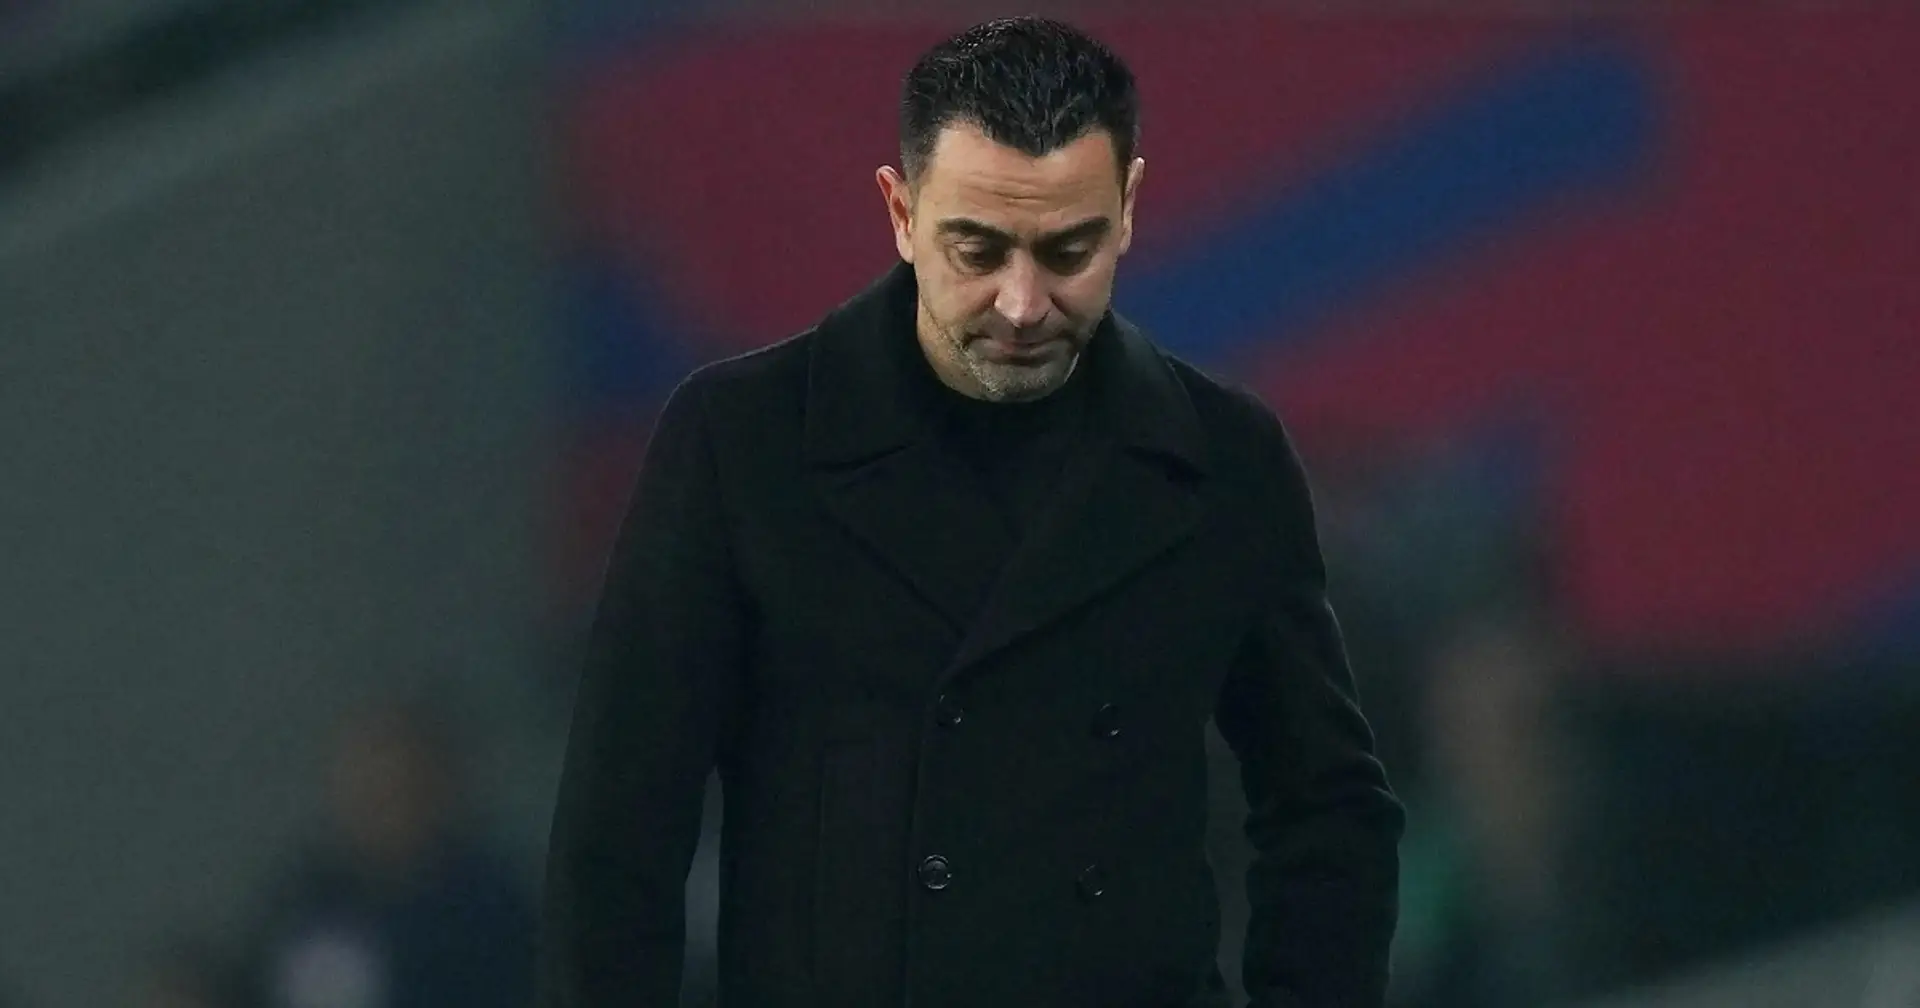 Do you want Xavi to reconsider and STAY?